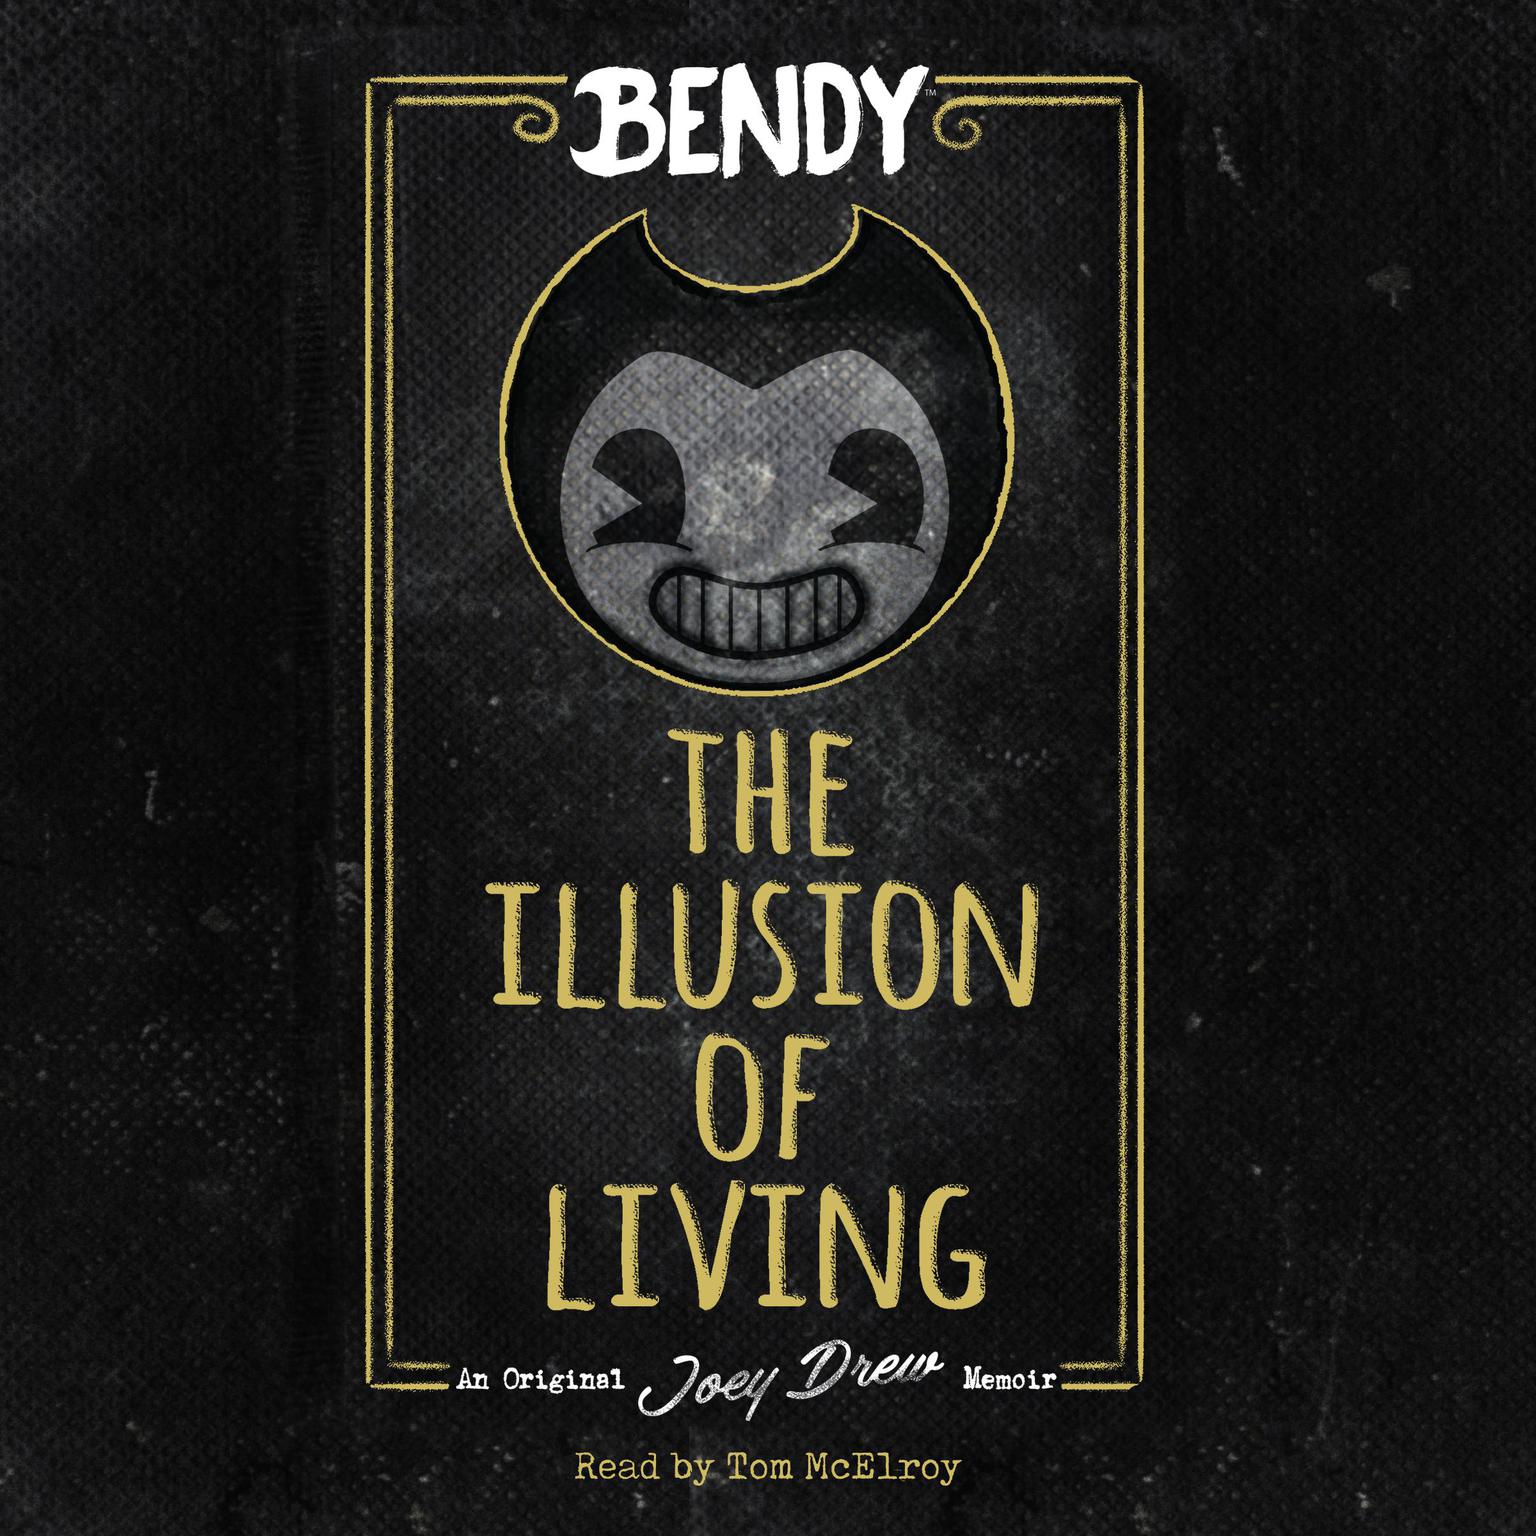 The Illusion of Living: An AFK Book (Bendy) Audiobook, by Adrienne Kress